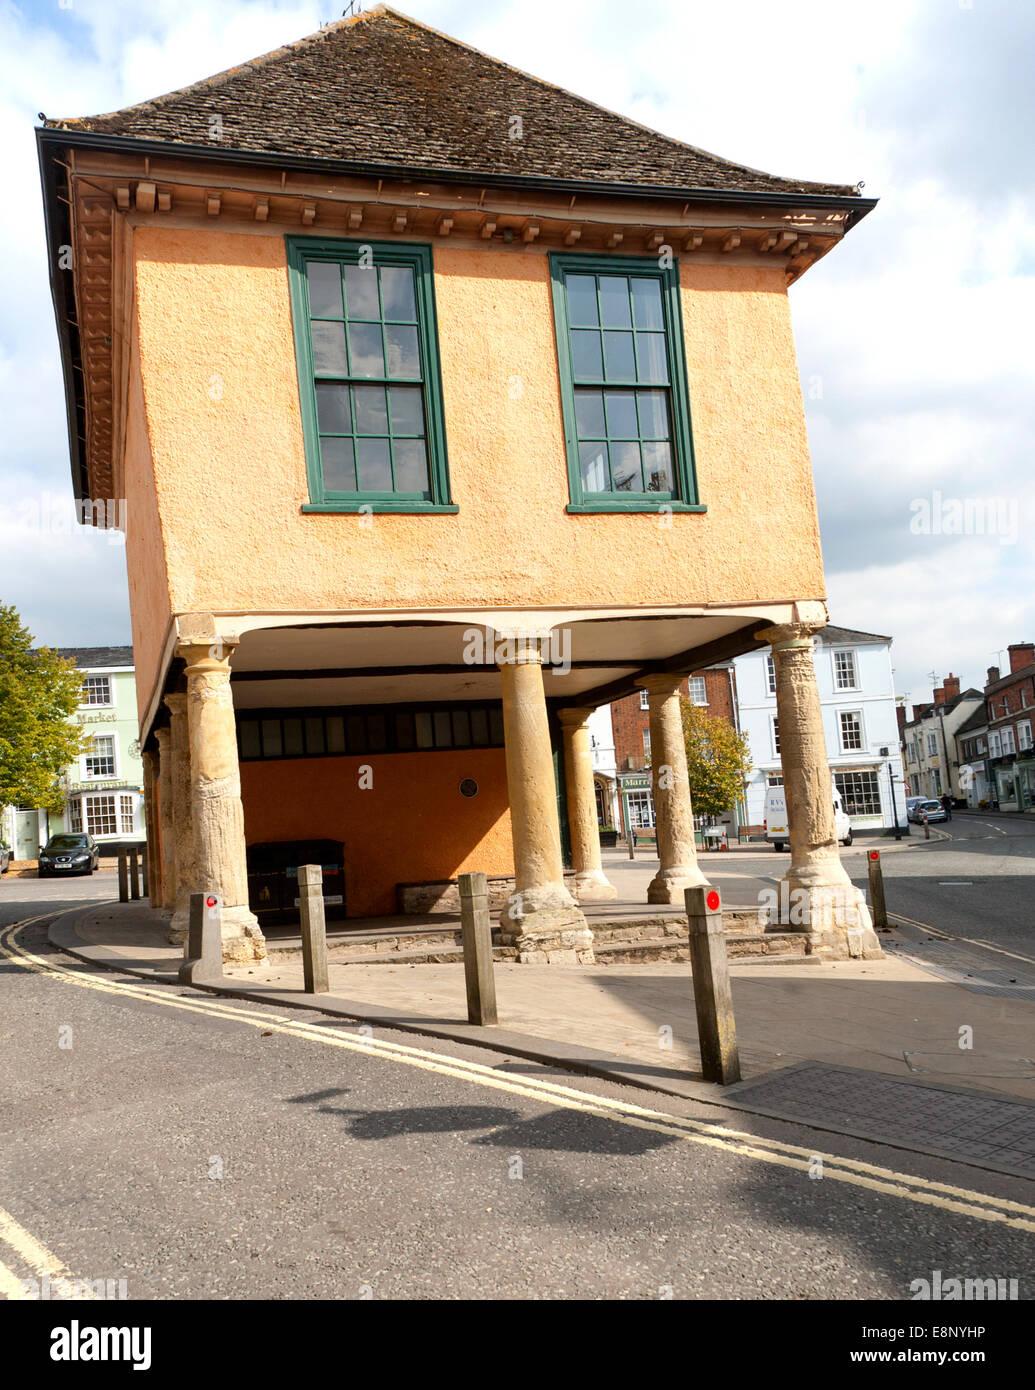 Seventeenth century Market Hall building in the market place of Faringdon, Oxfordshire, England, UK Stock Photo